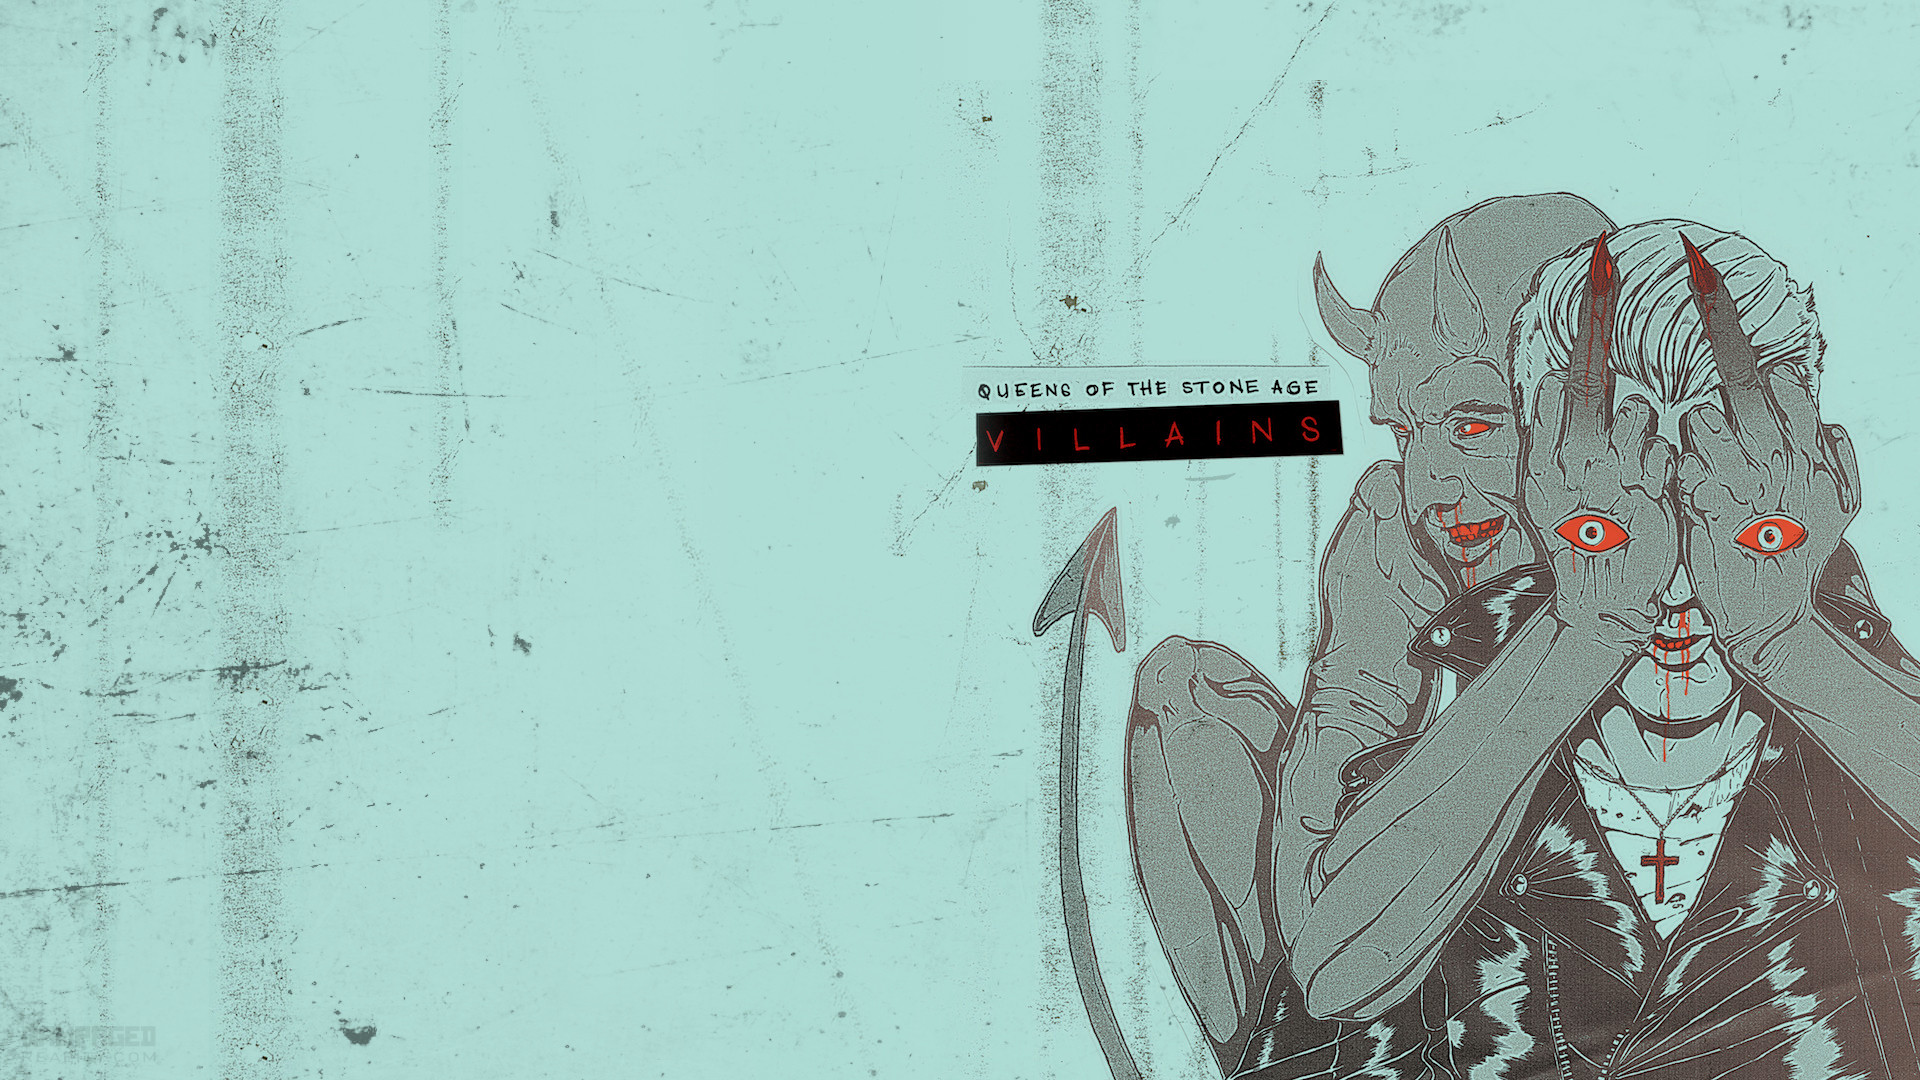 1920x1080 Queens of the Stone Age - Villains Indie Wallpaper  / Artwork by  boneface http://www.boneface.co.uk/